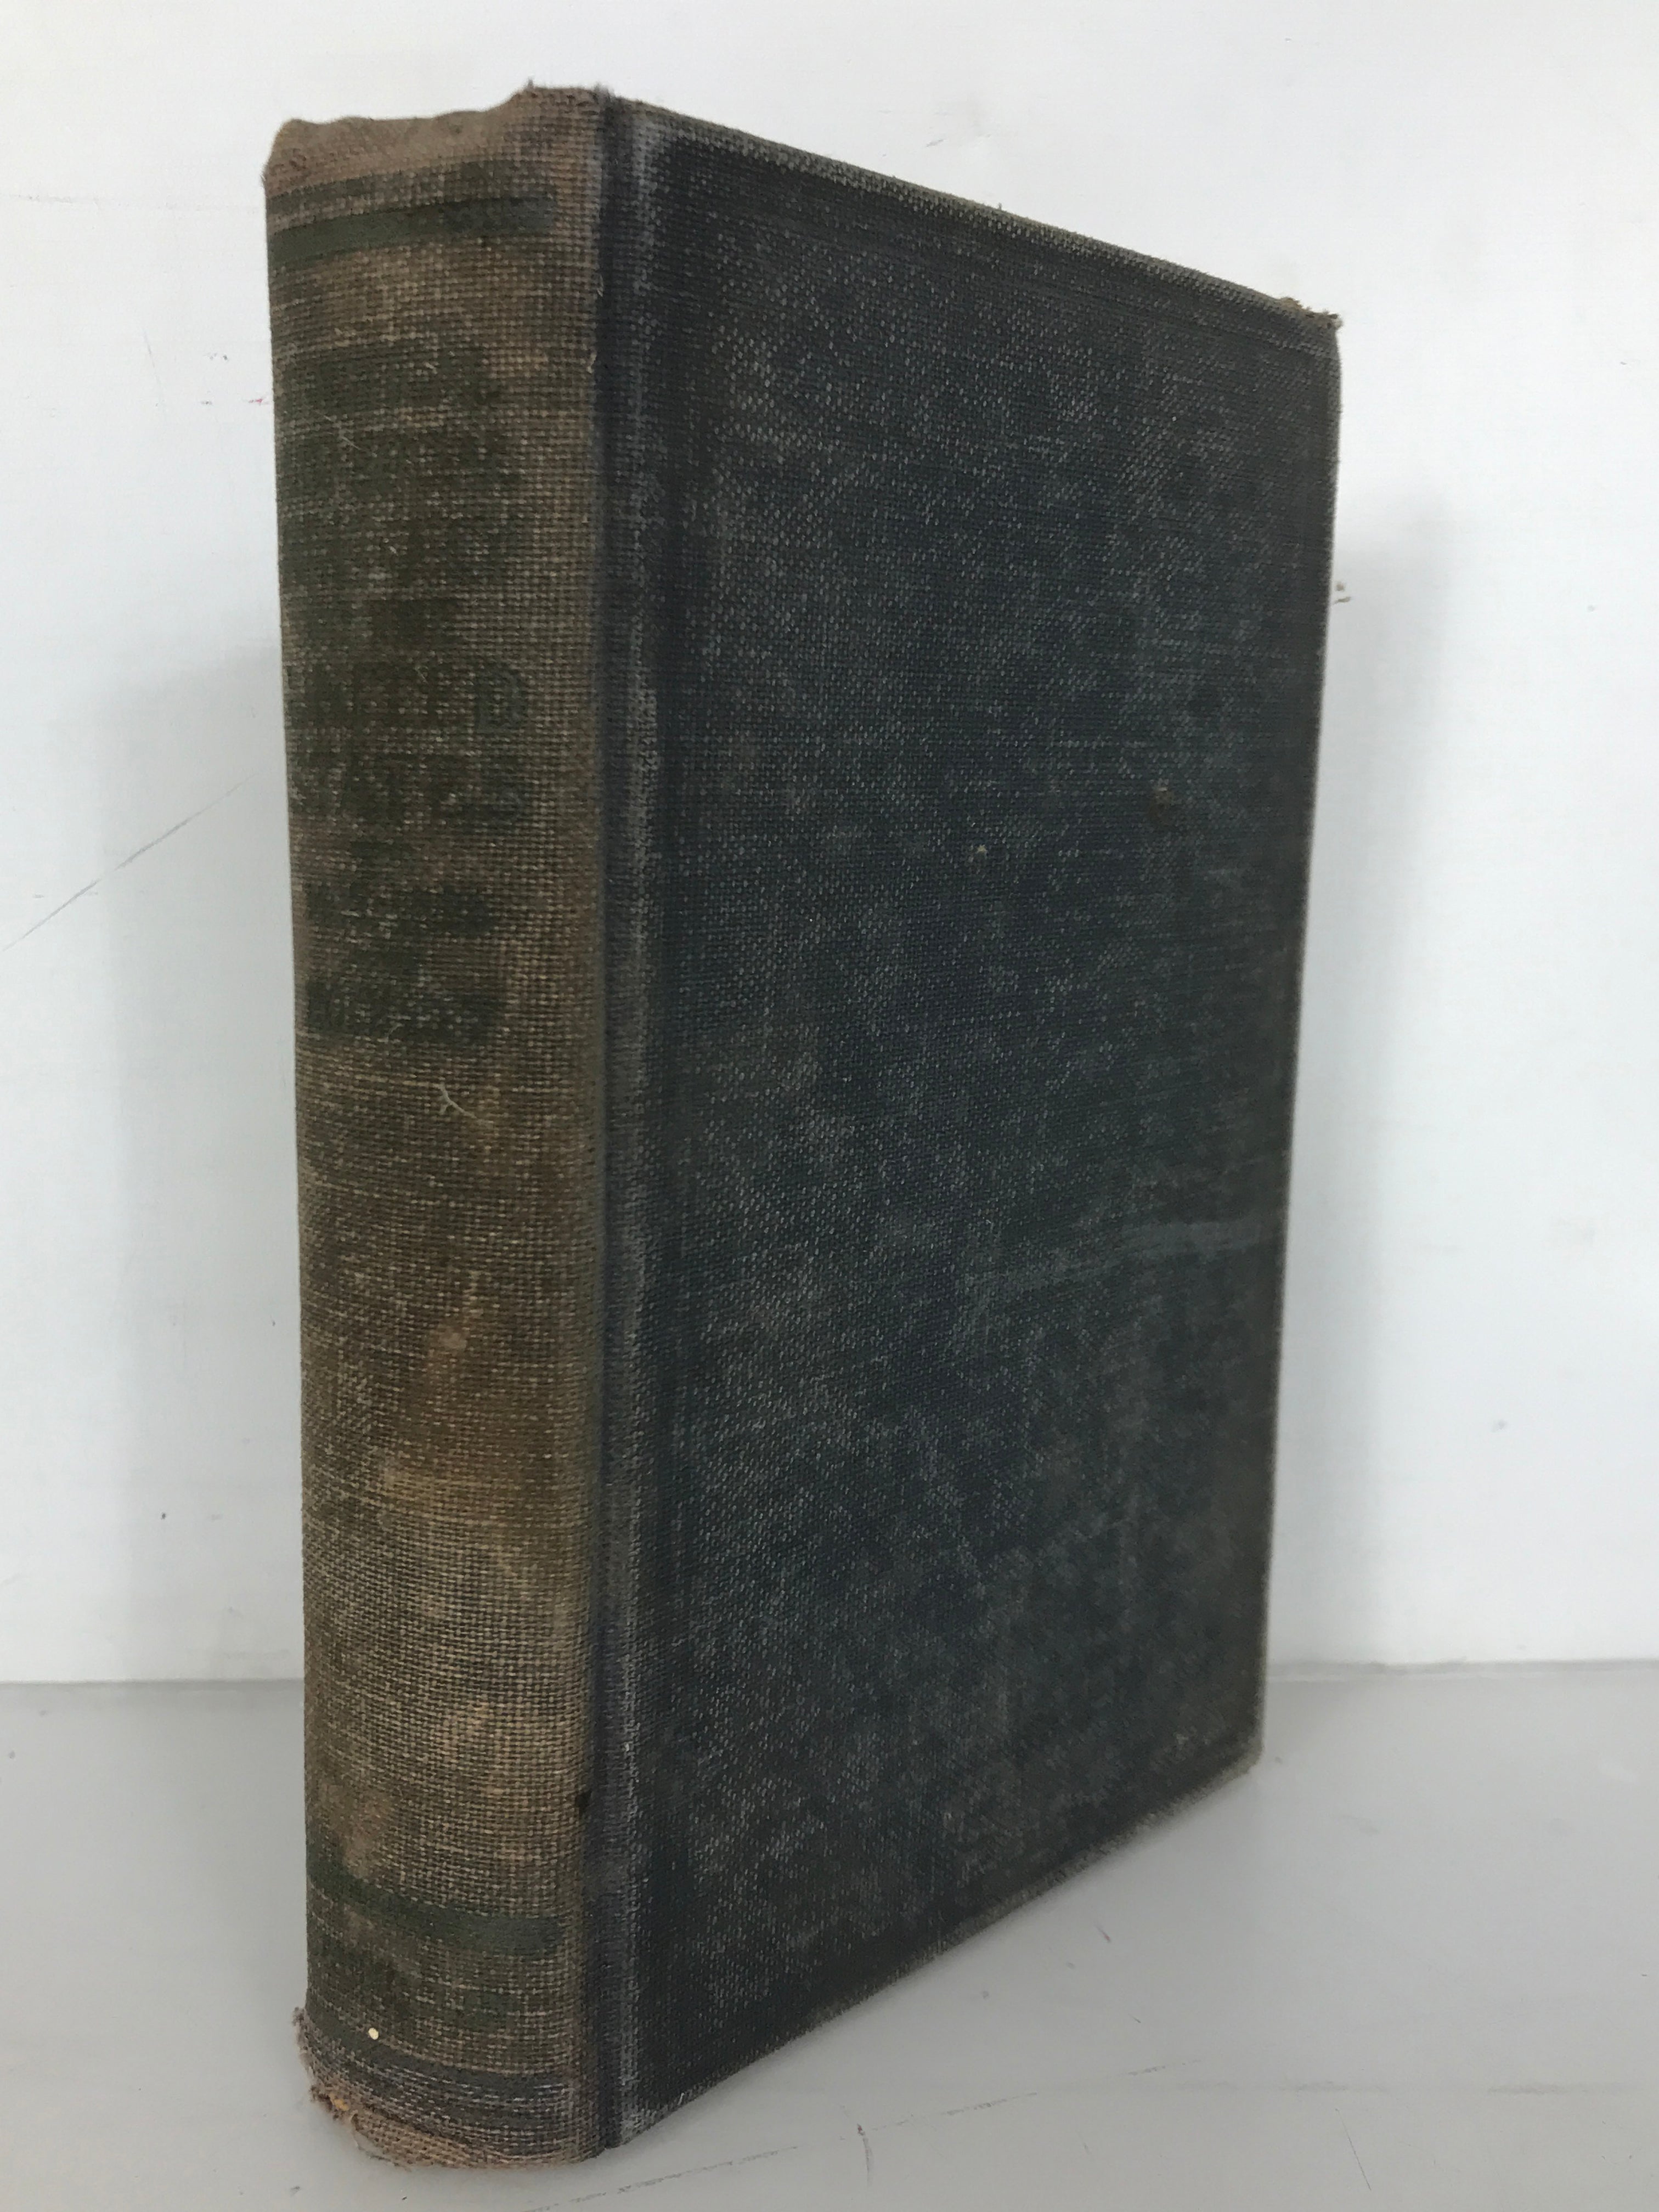 Political and Social History of the United States 1492-1828 by Homer C. Hockett 1928 HC Vintage Textbook